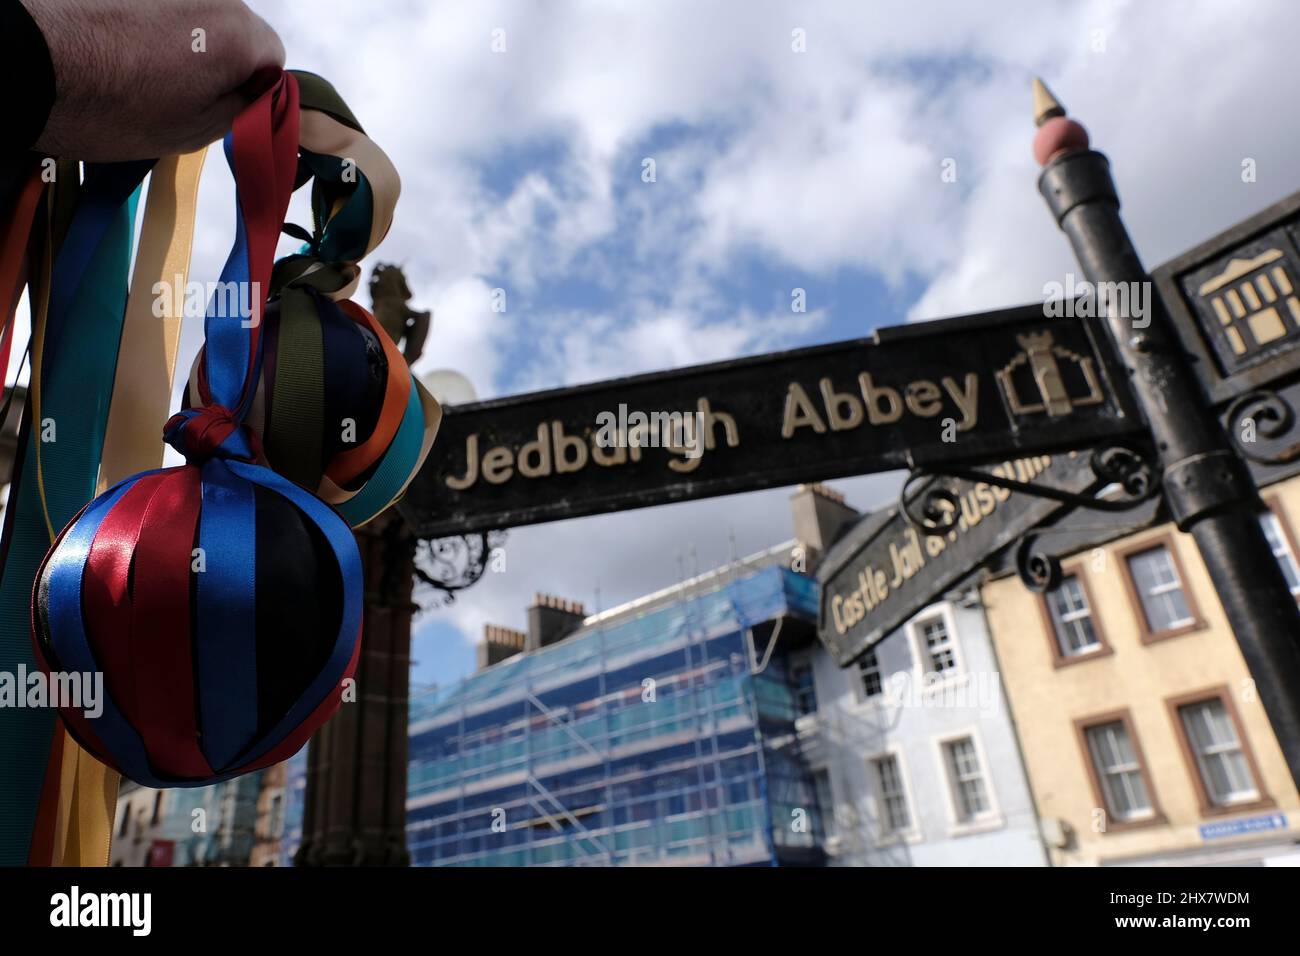 Jedburgh, Thursday 10 March 2022. Ceremonially decorated hand baÕs in the market place, held up for display ahead of the annual 'Fastern Eve Handba' event in Jedburgh's High Street in the Scottish Borders on March 10, 2022 in Jedburgh, Scotland. The annual event, which started in the 1700's, takes place today and involves two teams, the Uppies (residents from the higher part of Jedburgh) and the Doonies (residents from the lower part of Jedburgh) getting the ball to either the top or bottom of the town. The ball, which is made of leather, stuffed with straw and decorated with ribbons is thrown Stock Photo